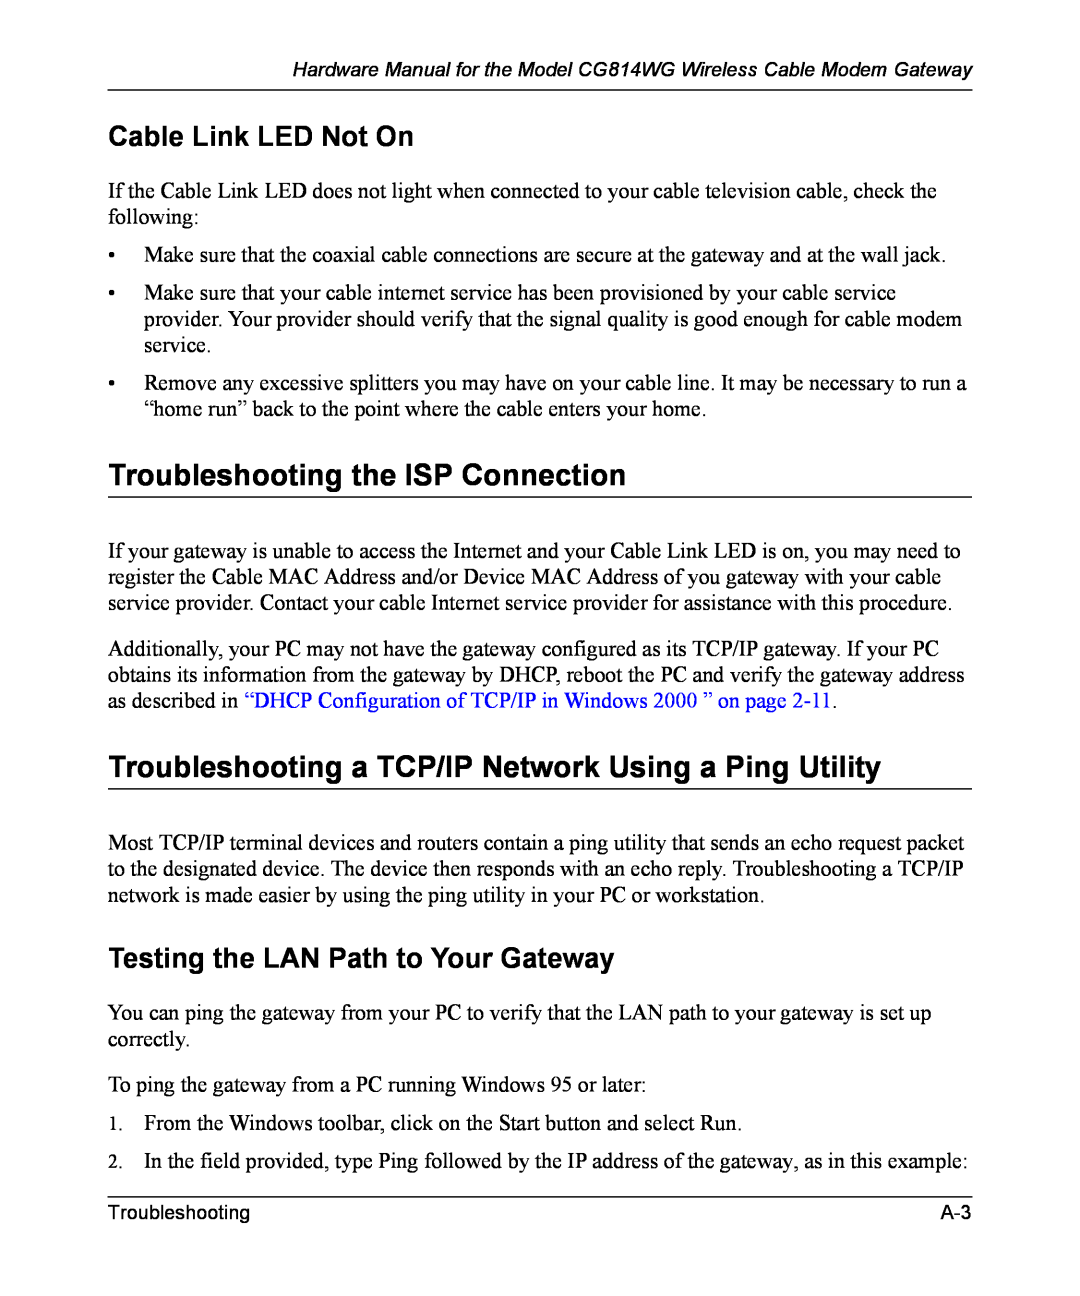 NETGEAR CG814WG manual Troubleshooting the ISP Connection, Troubleshooting a TCP/IP Network Using a Ping Utility 